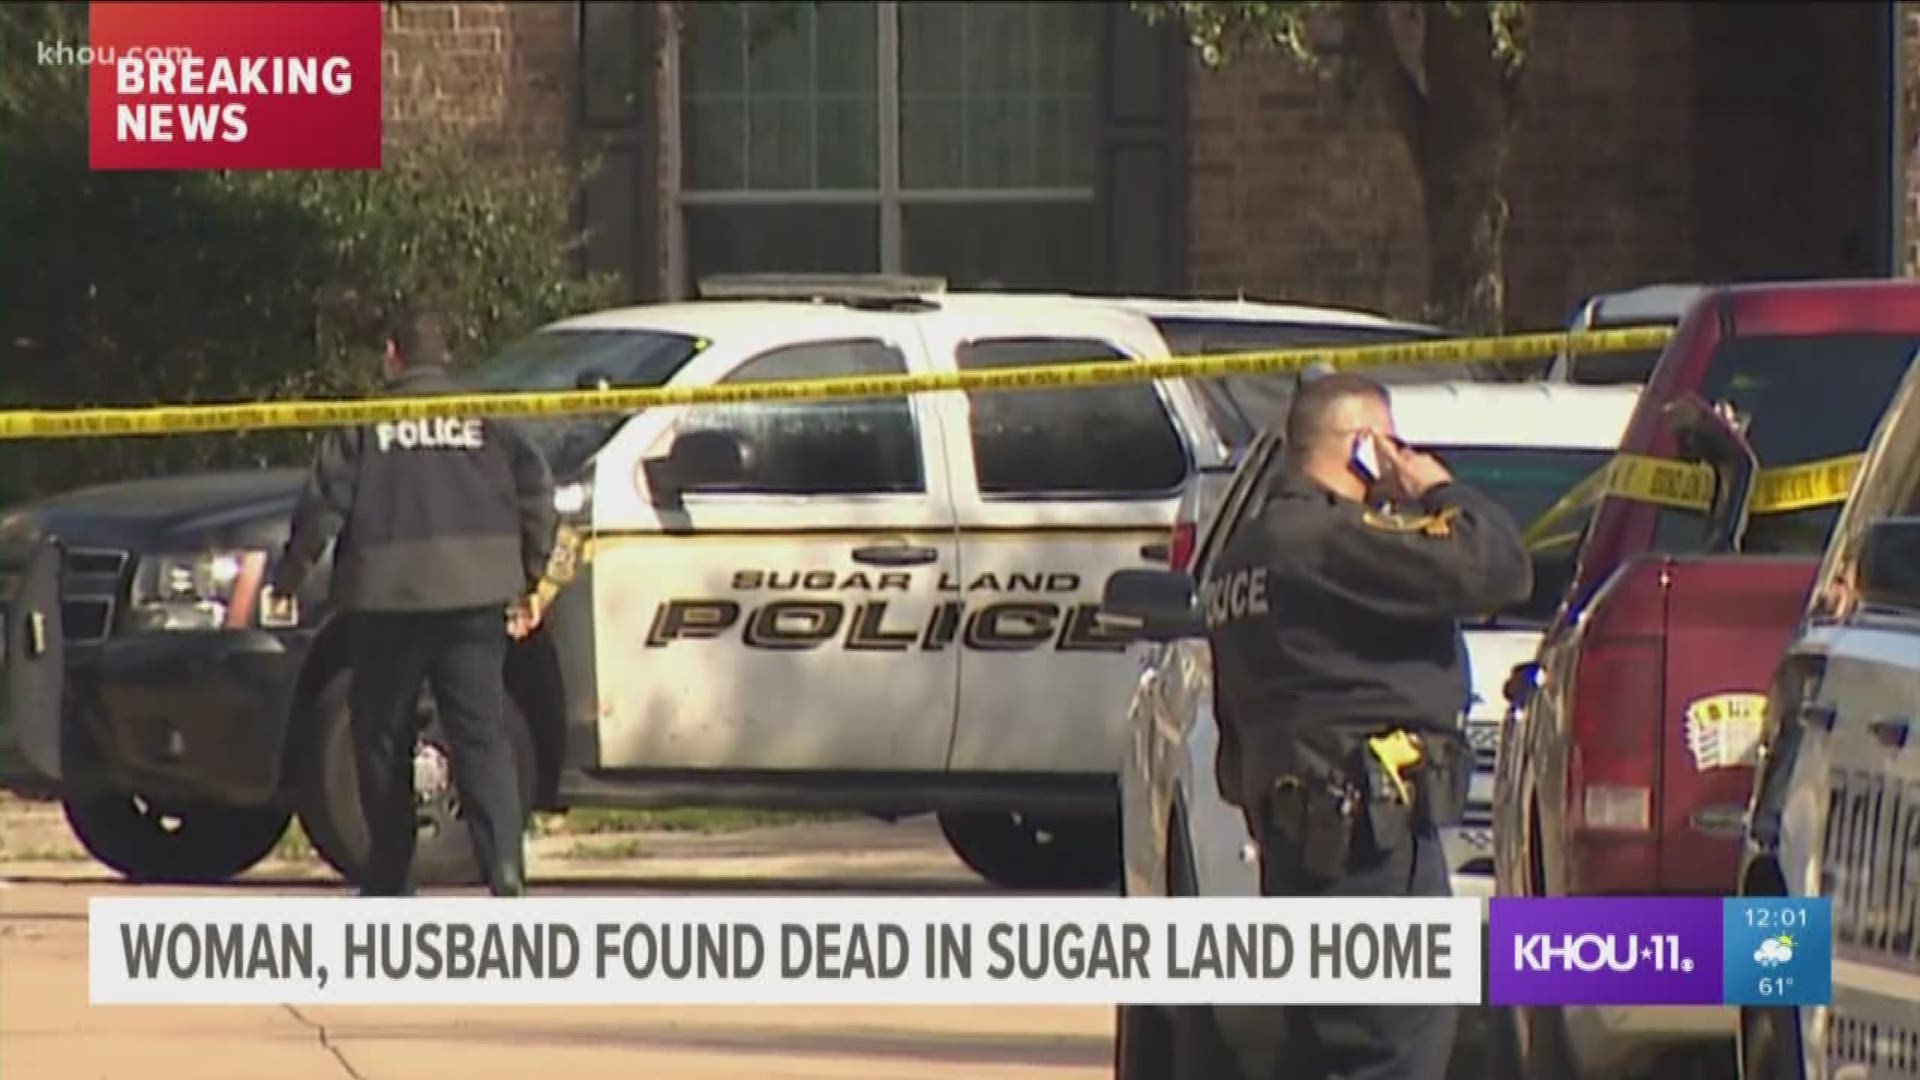 Police investigators have responded to an apparent murder-suicide at a home in Sugar Land, a city spokesman confirms to KHOU 11.